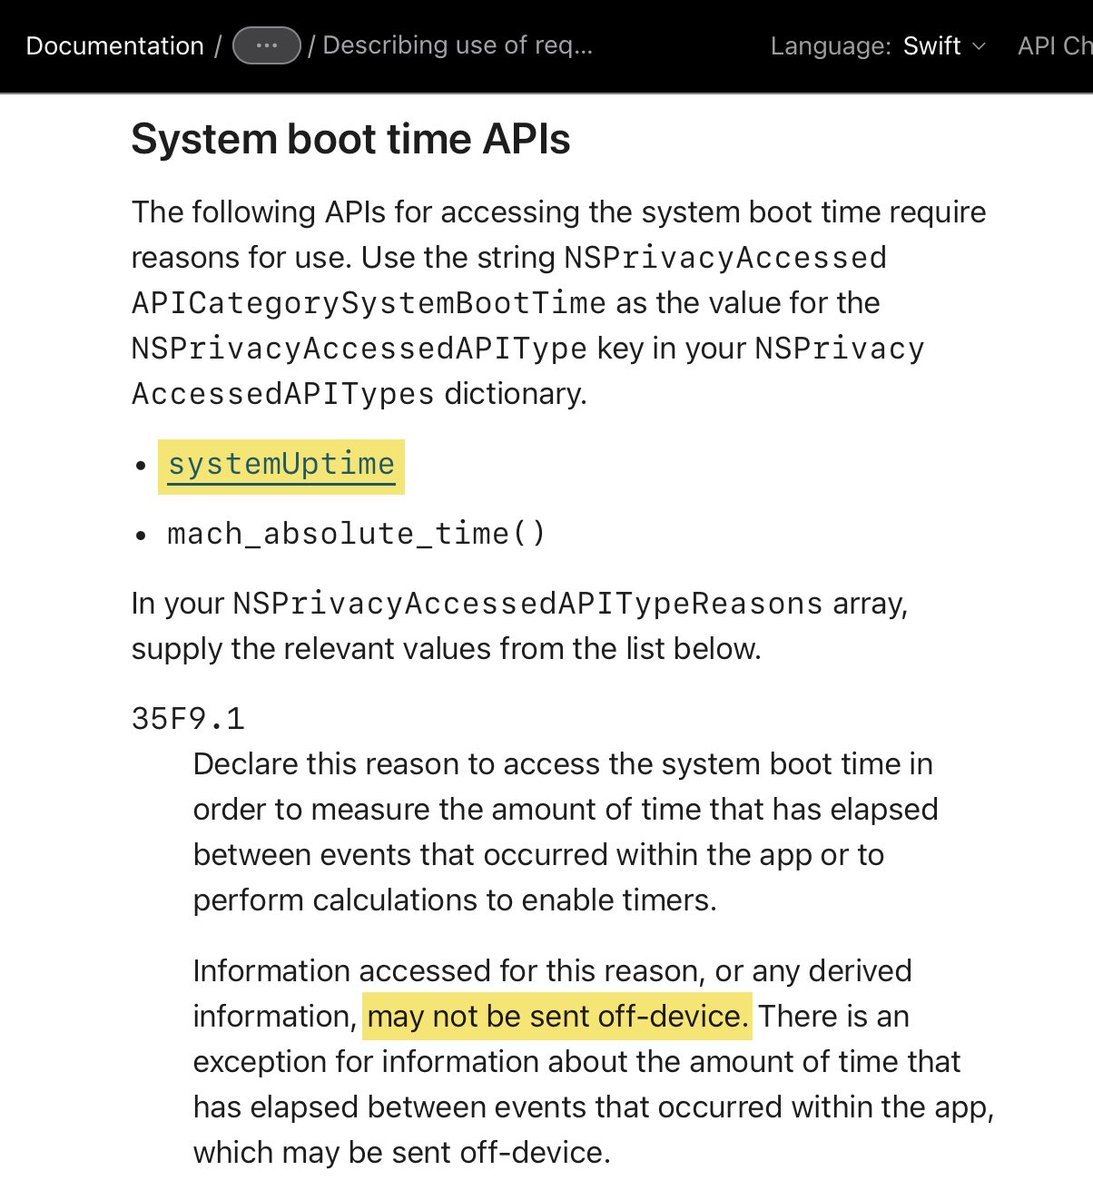 It's May 1. Instagram for iOS just got updated. It still sends the device's system uptime to remote servers. Starting today developers are no longer allowed to access this API without providing a reason. And in no way can the app send the value off-device.
#Privacy